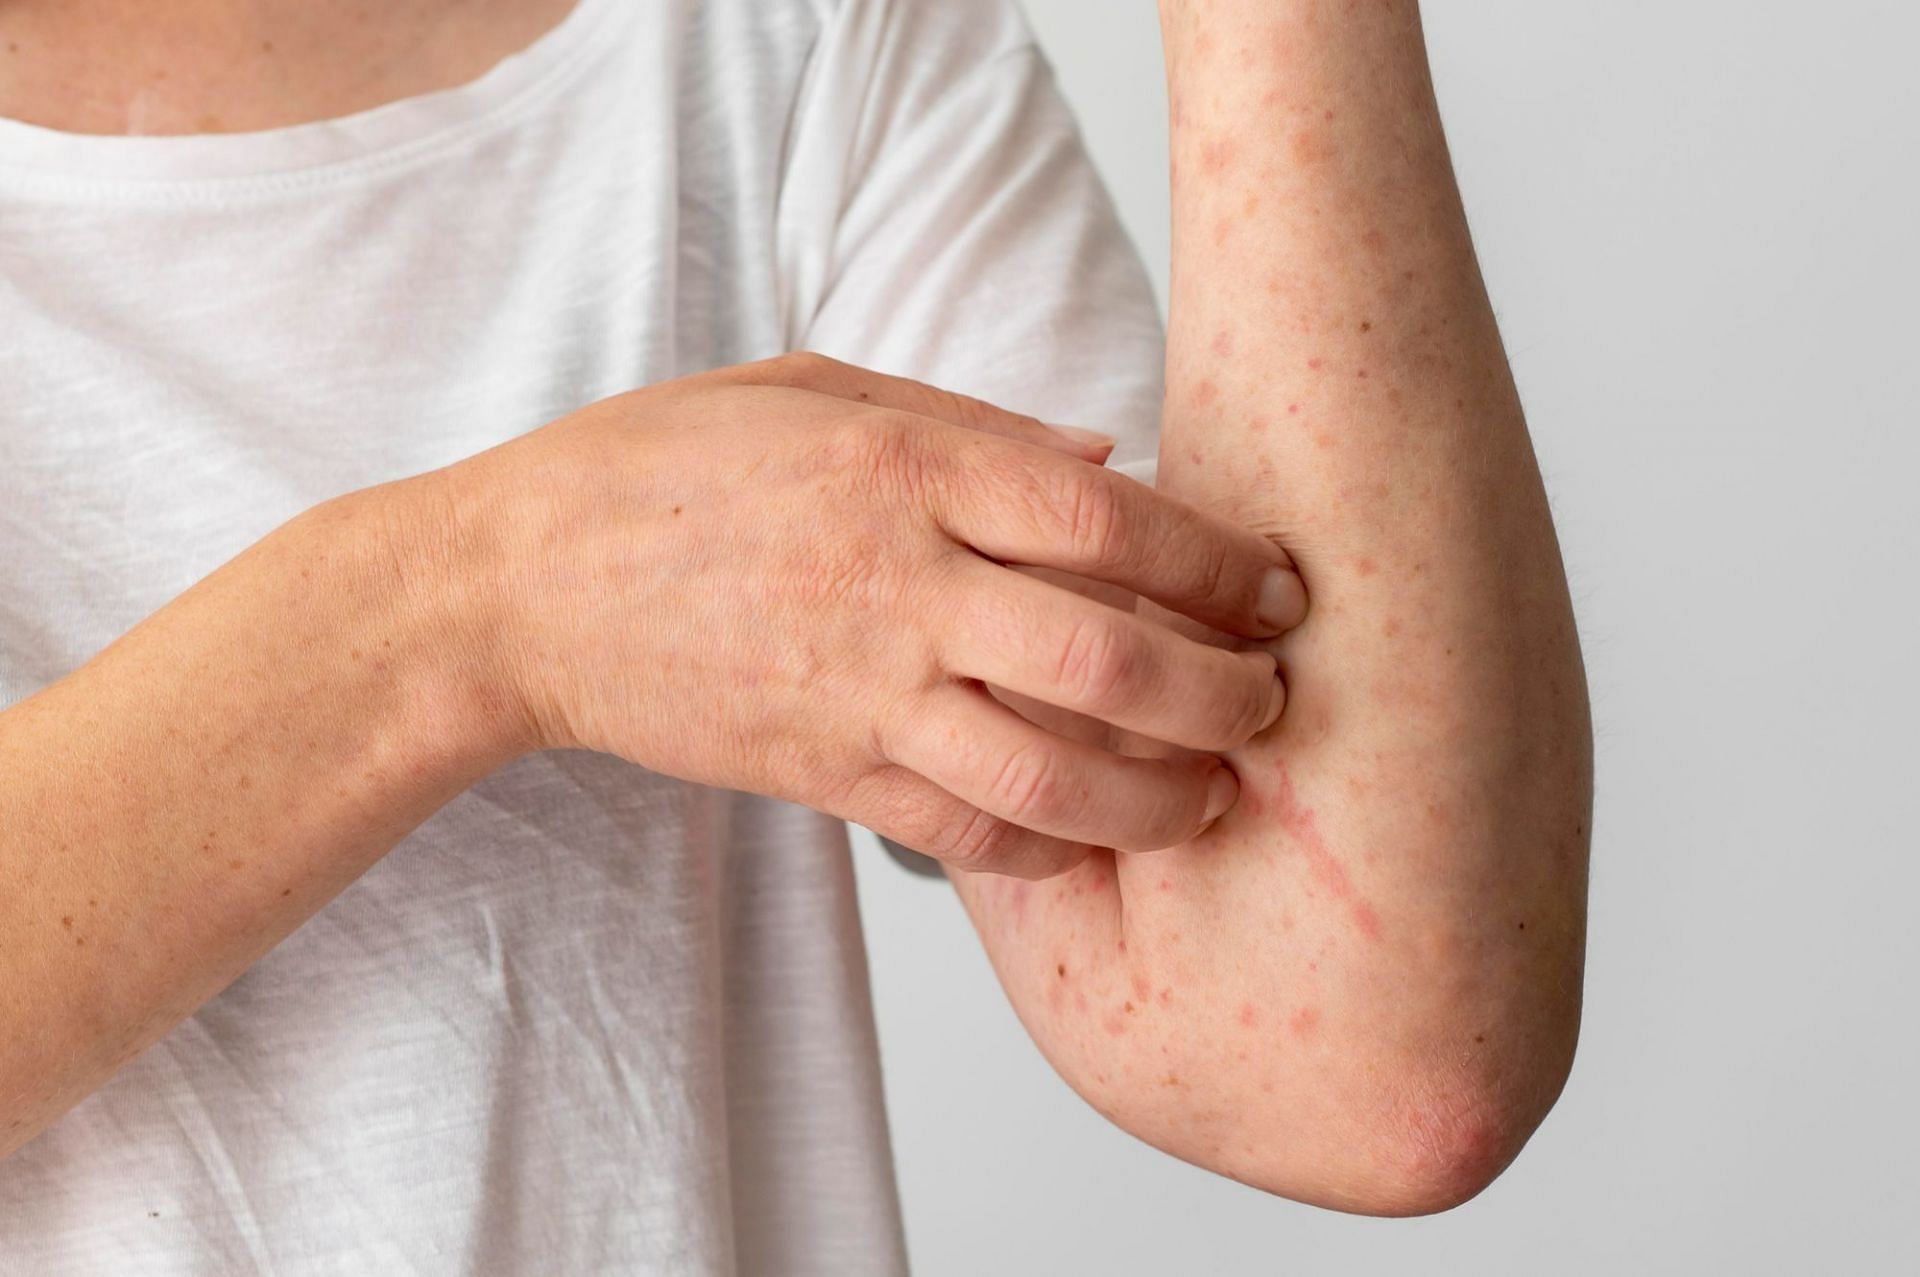 Scabies has potential to spread through skin-to-skin contact, which makes it a major threat in crowded environments (Image by Freepik on Freepik)